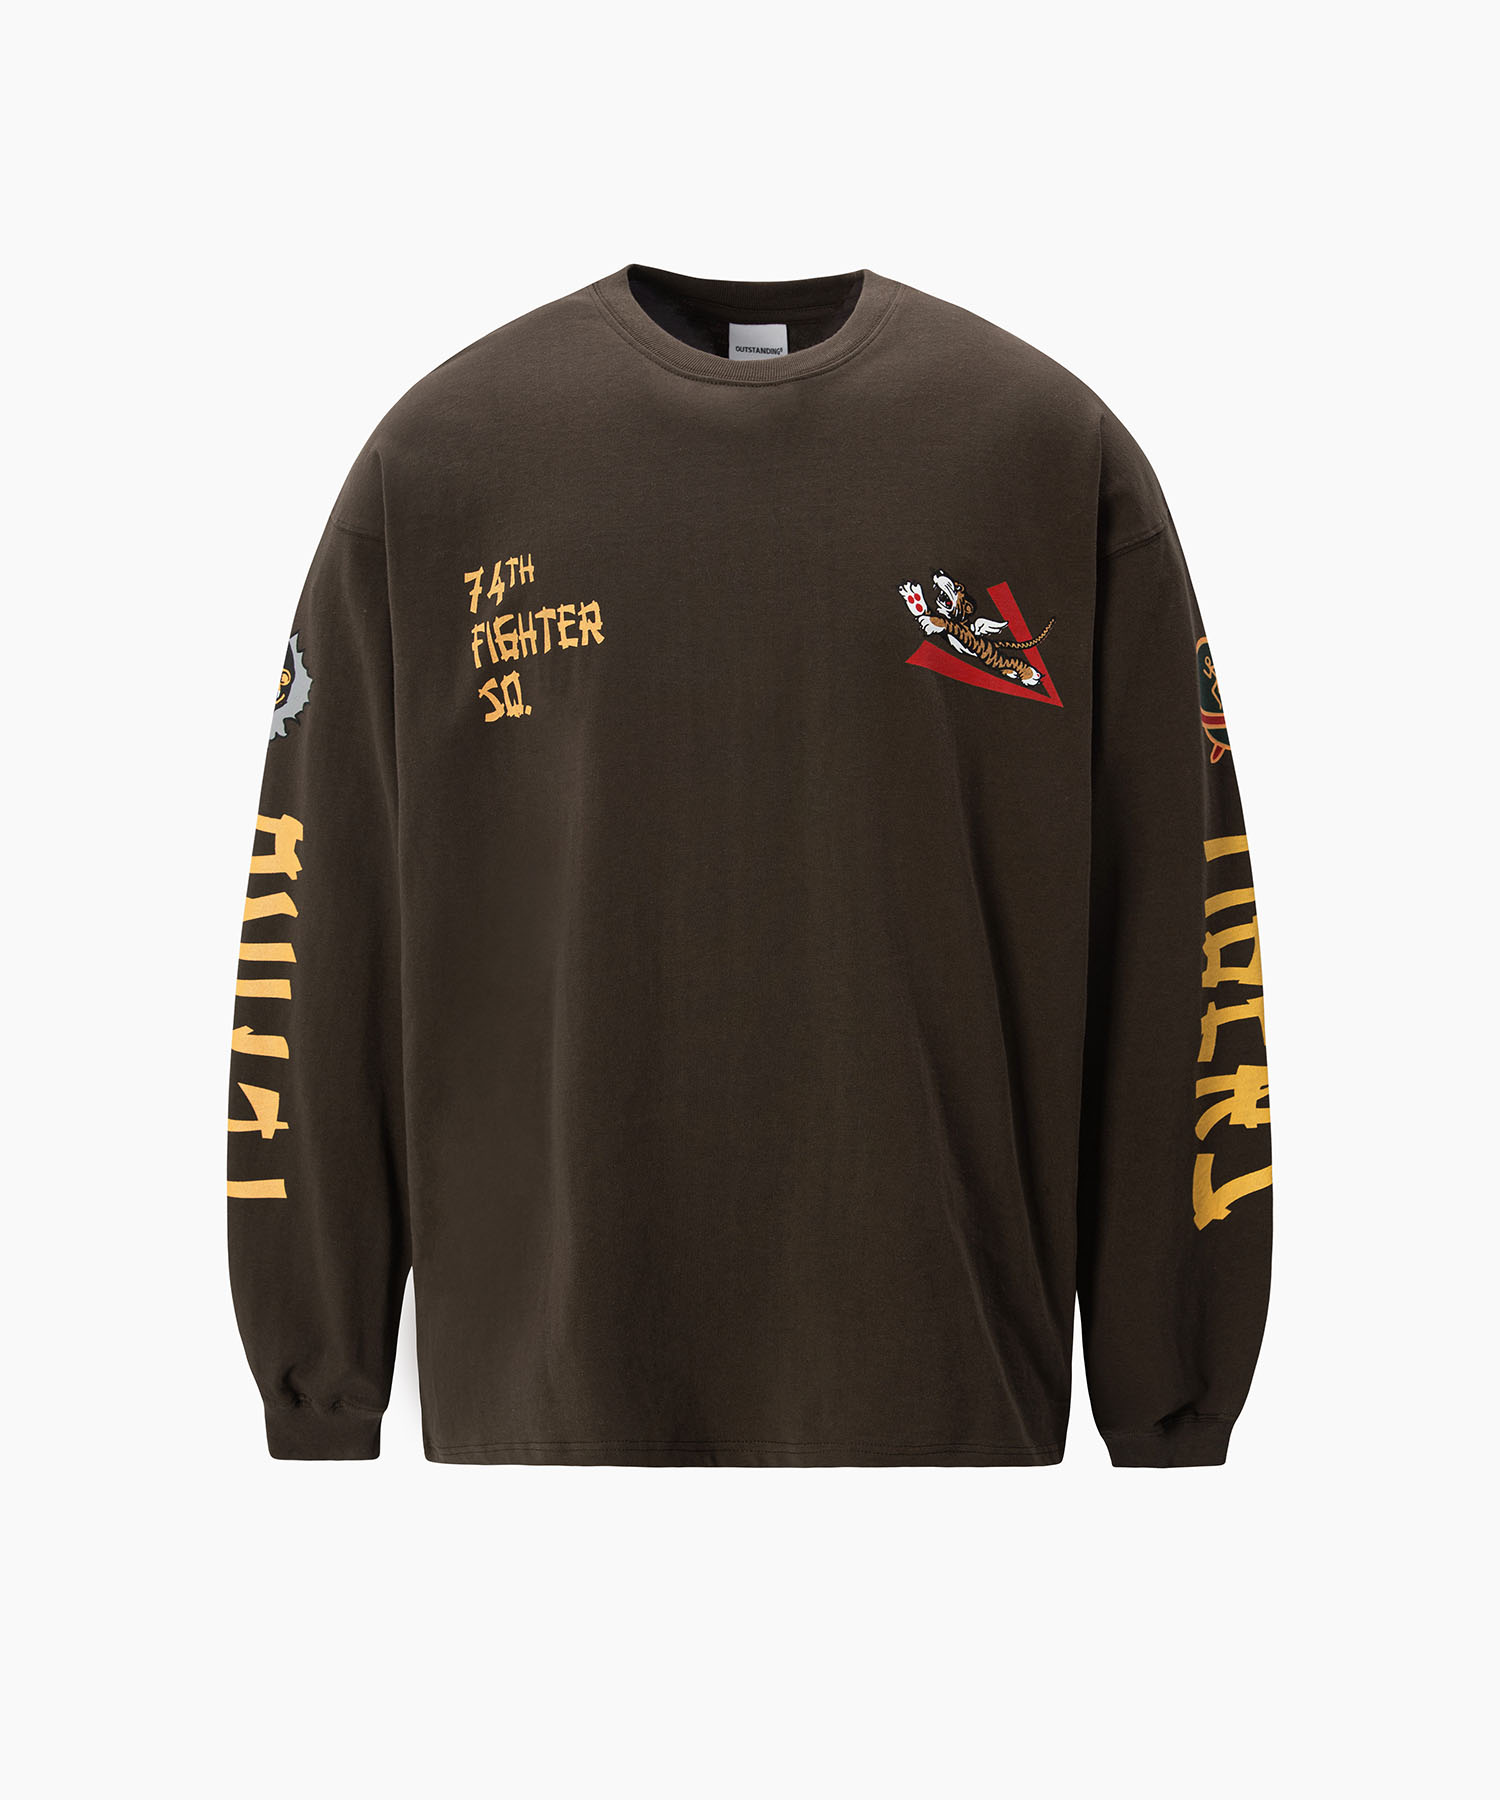 MIL SERIES LONG SLEEVE(74TH FIGHTER SQ)_BROWN